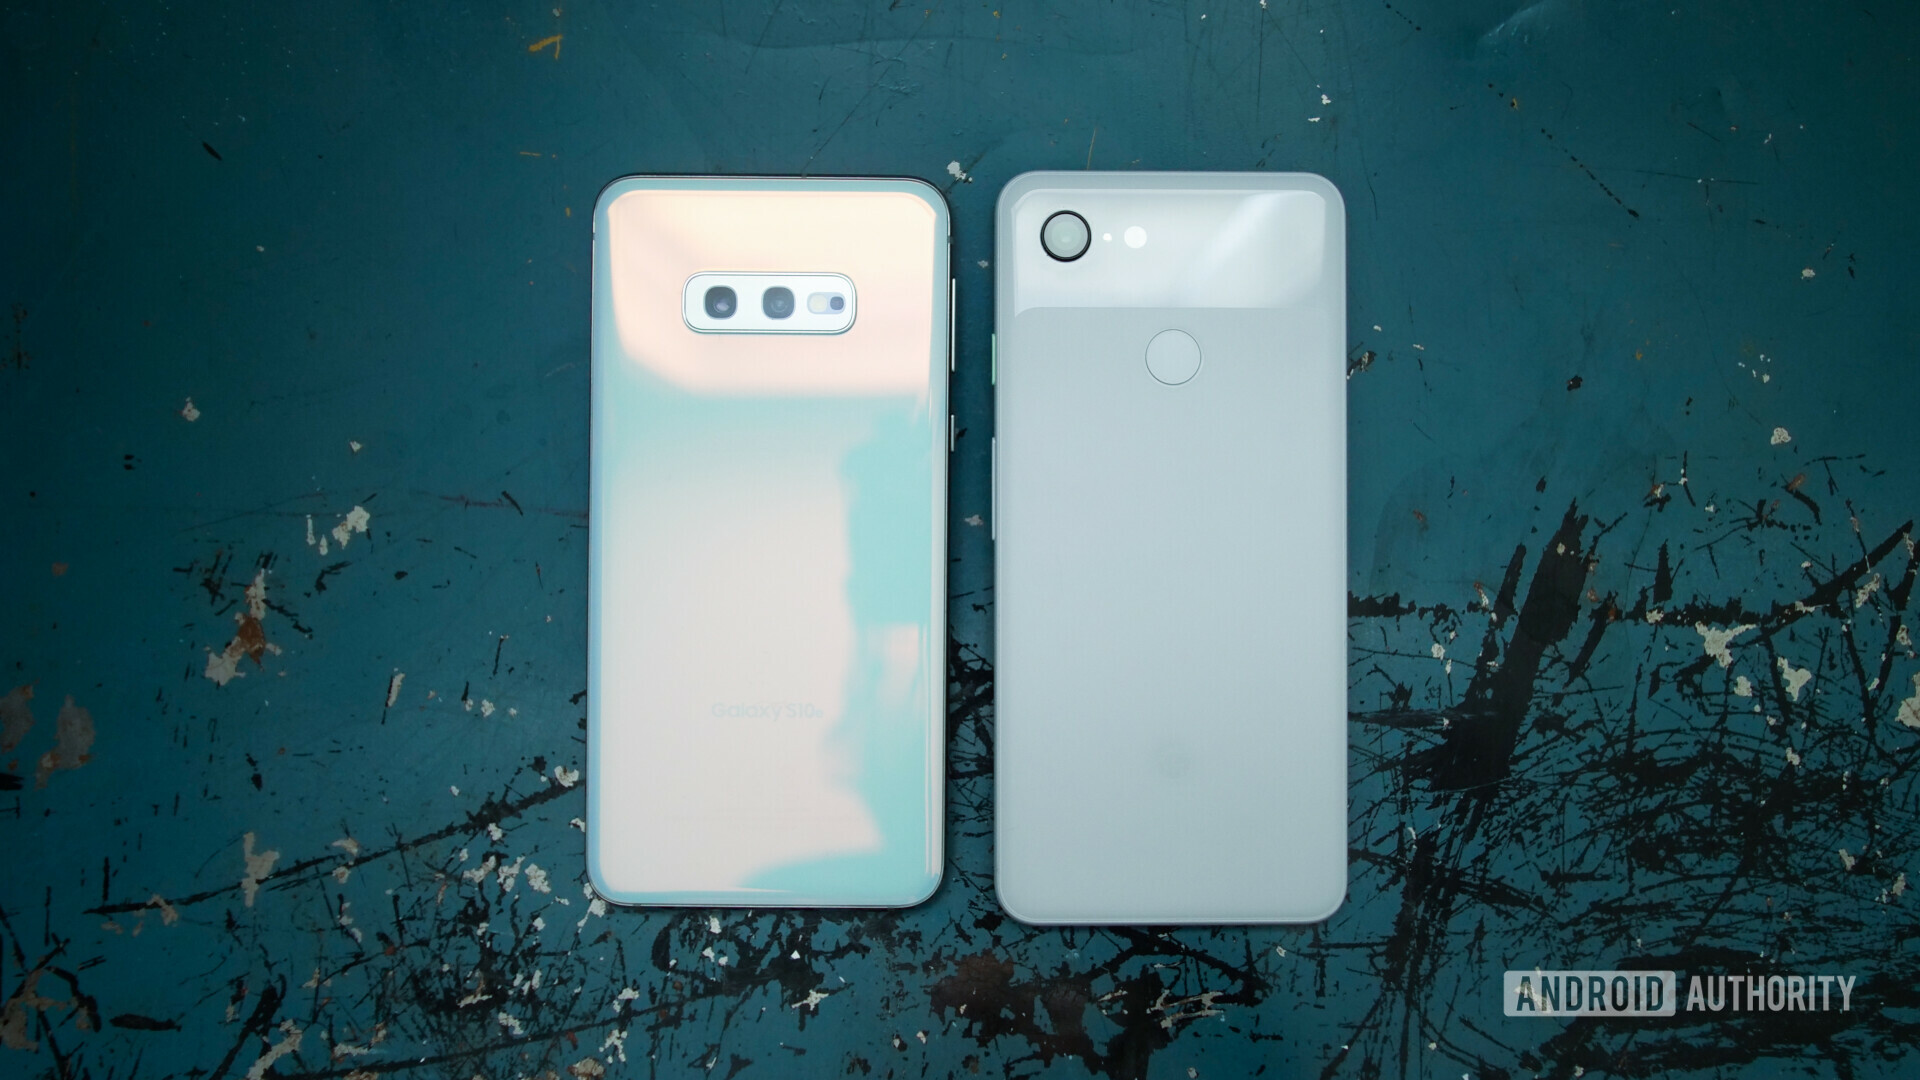 Backside of Samsung galaxy s10e next to a google pixel 3 in white color